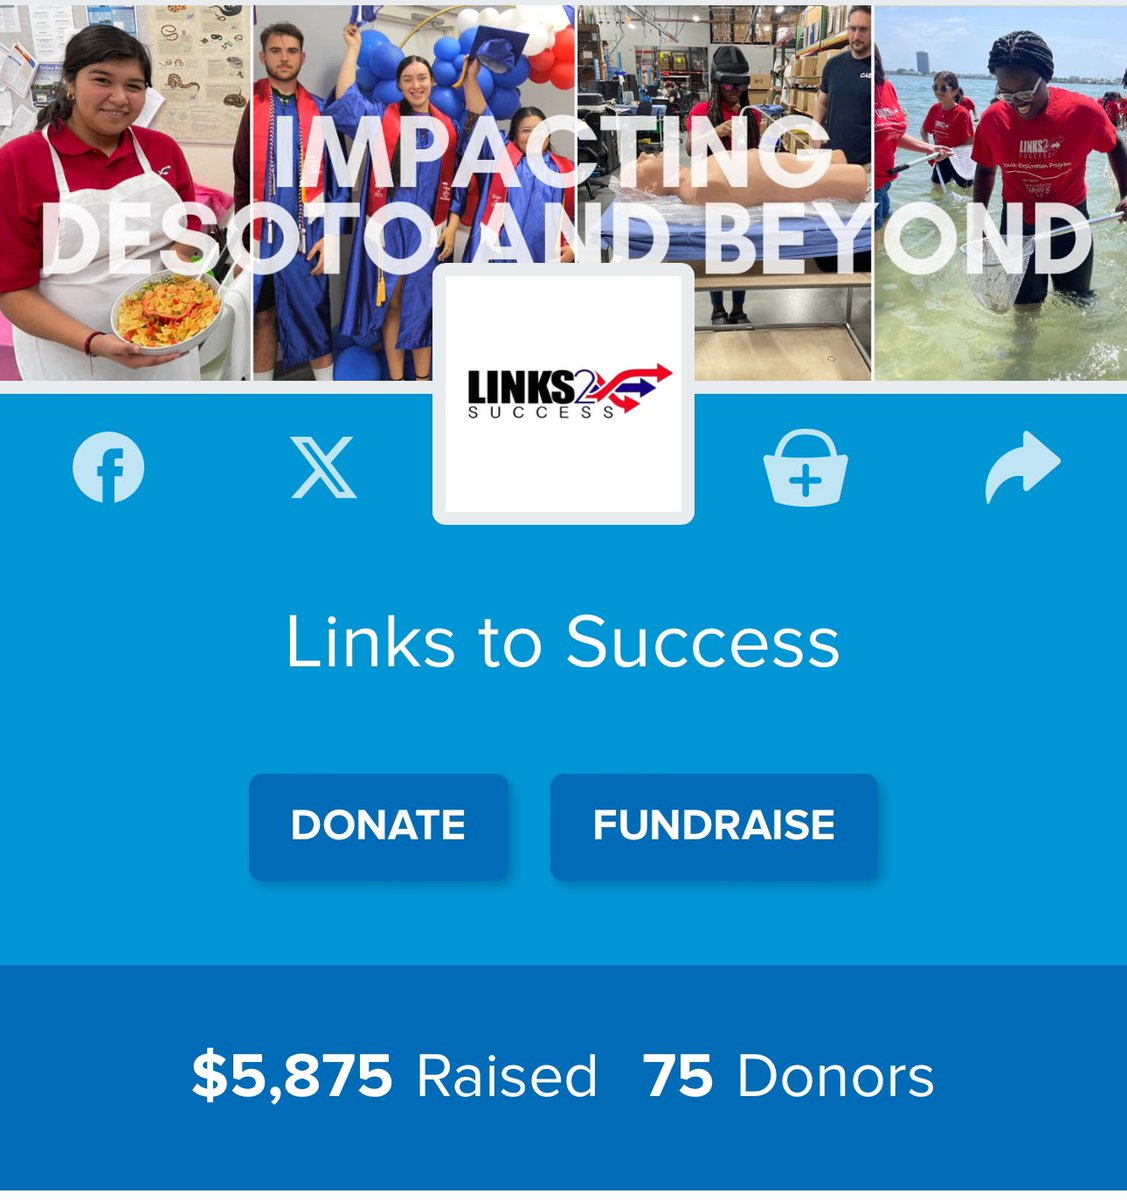 Less than 30 mins left to have your donations to @Links2Success matched! We are so close to raising $6000, will you help get us there? The Giving Challenge ends today at noon! Donate here: givingchallenge.org/organizations/… #GivingChallenge2024